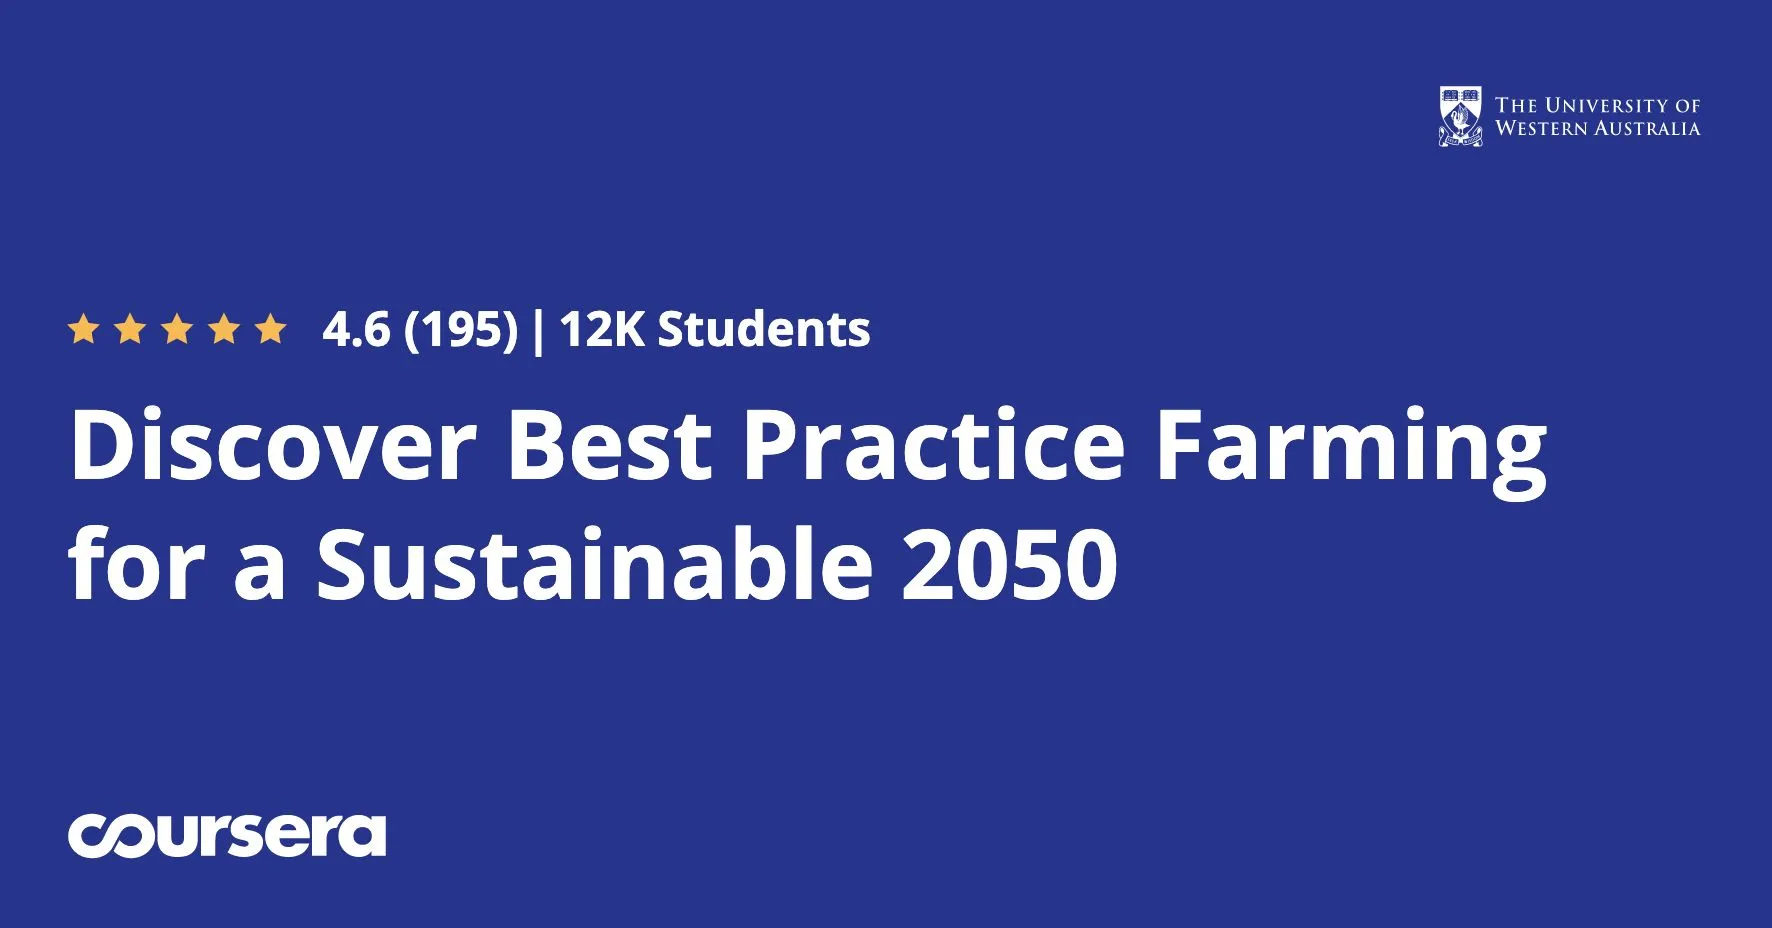 Discover Best Practice Farming for a Sustainable 2050